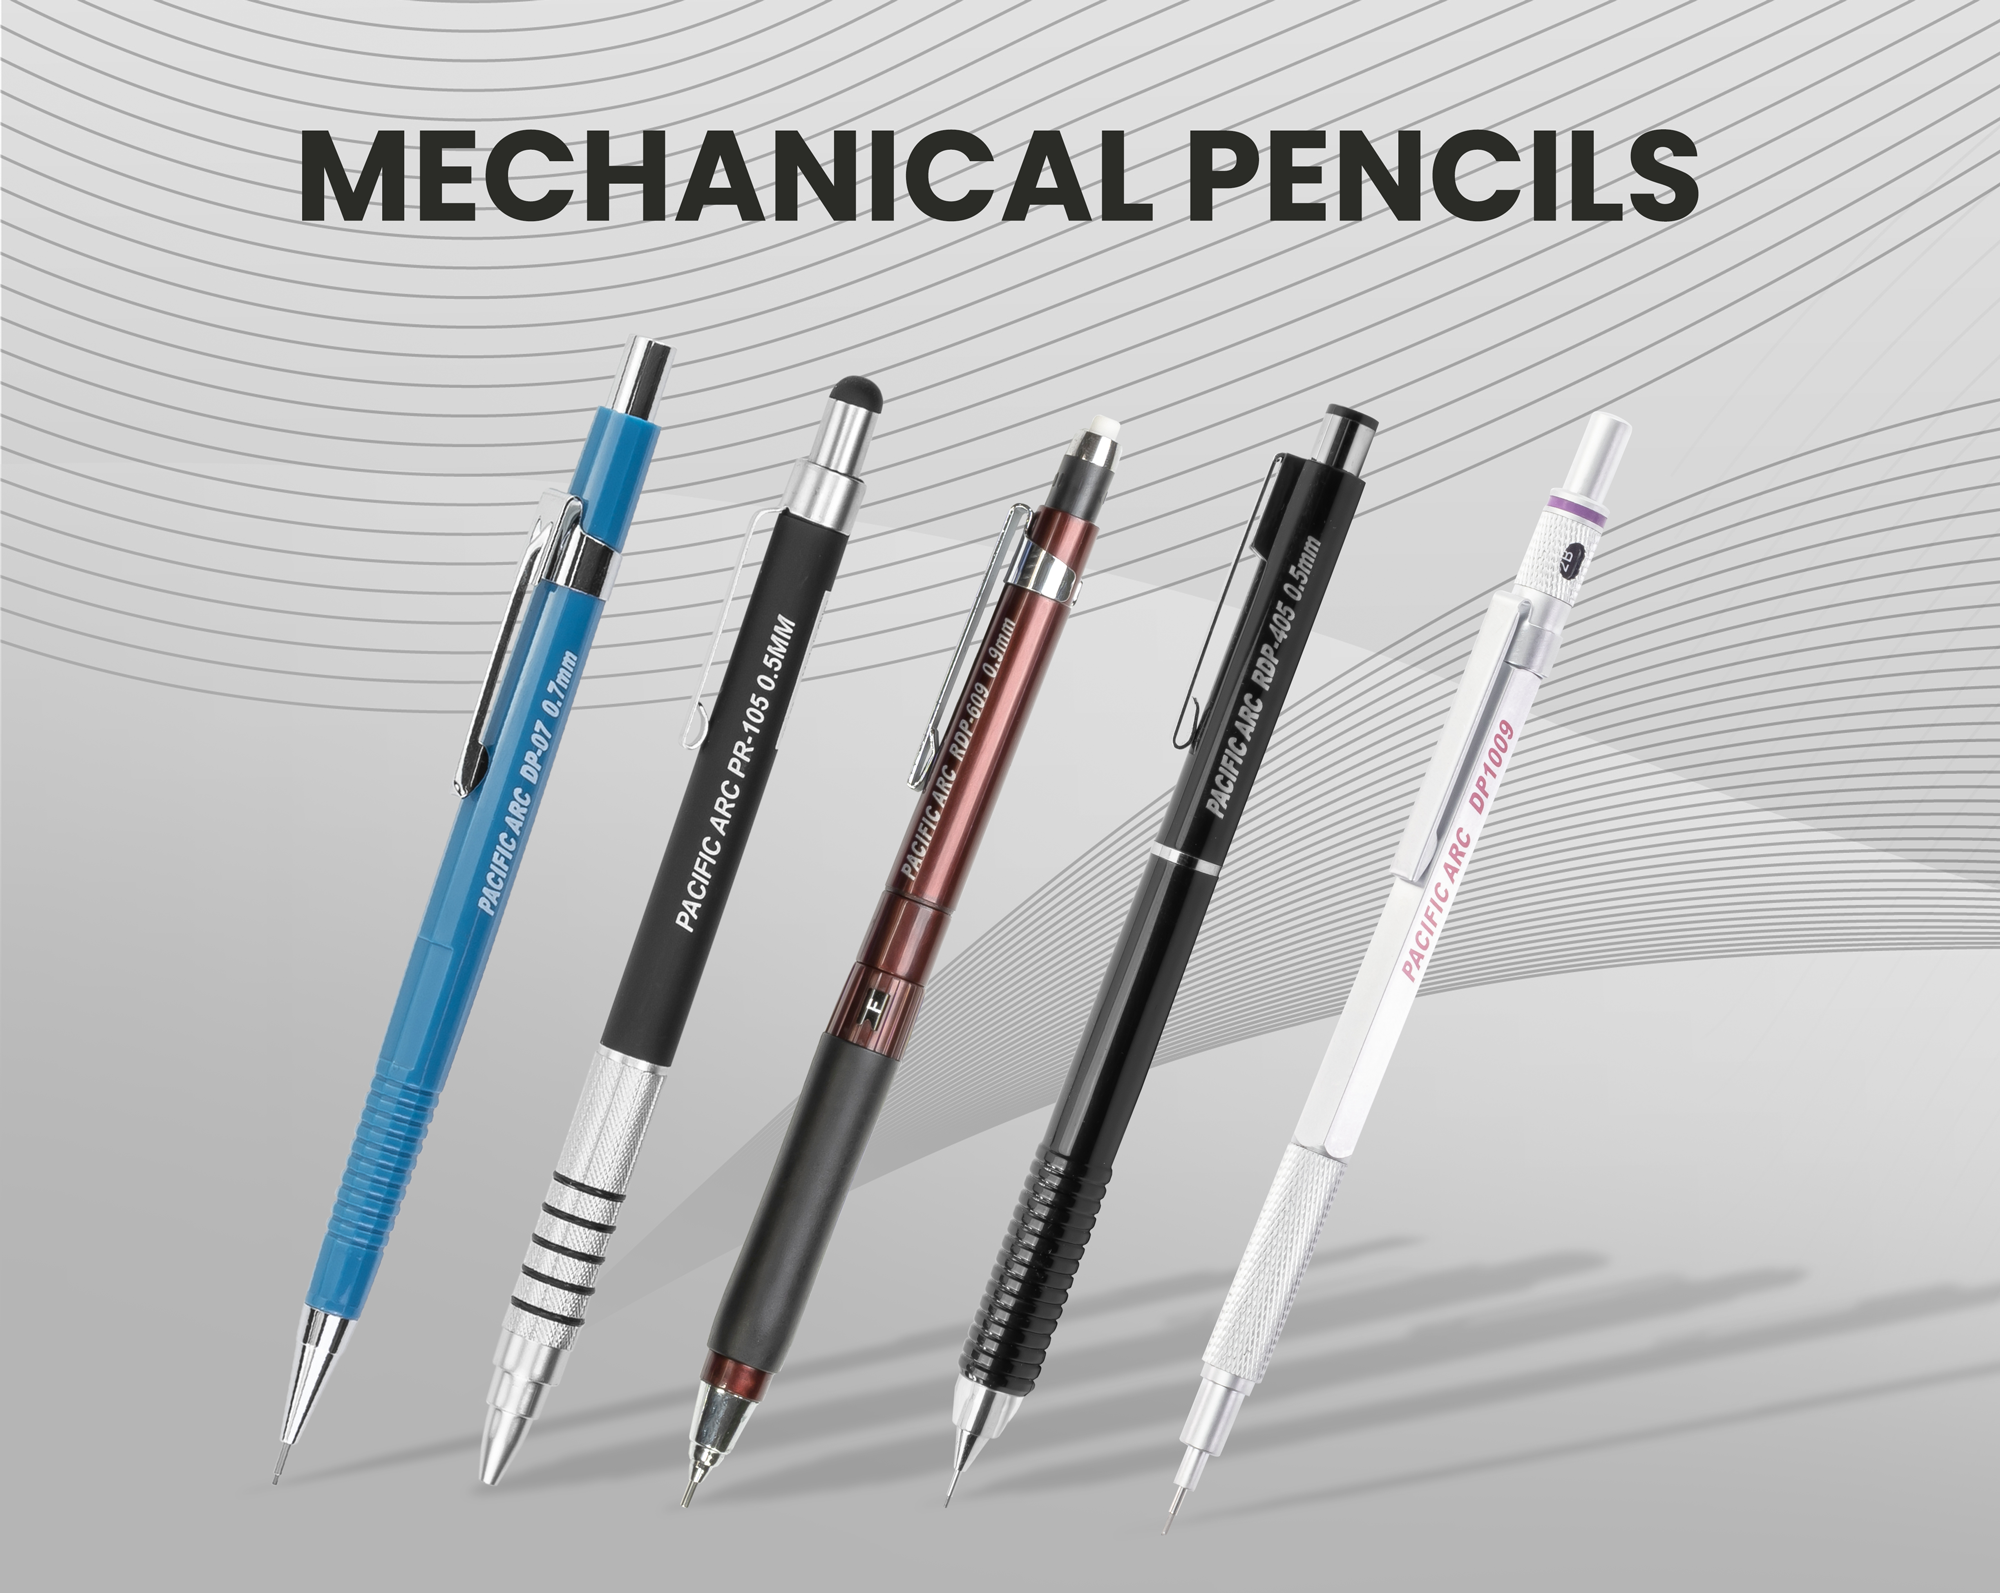 Pacific Arc Graphite Pencils, 2H - Midwest Technology Products